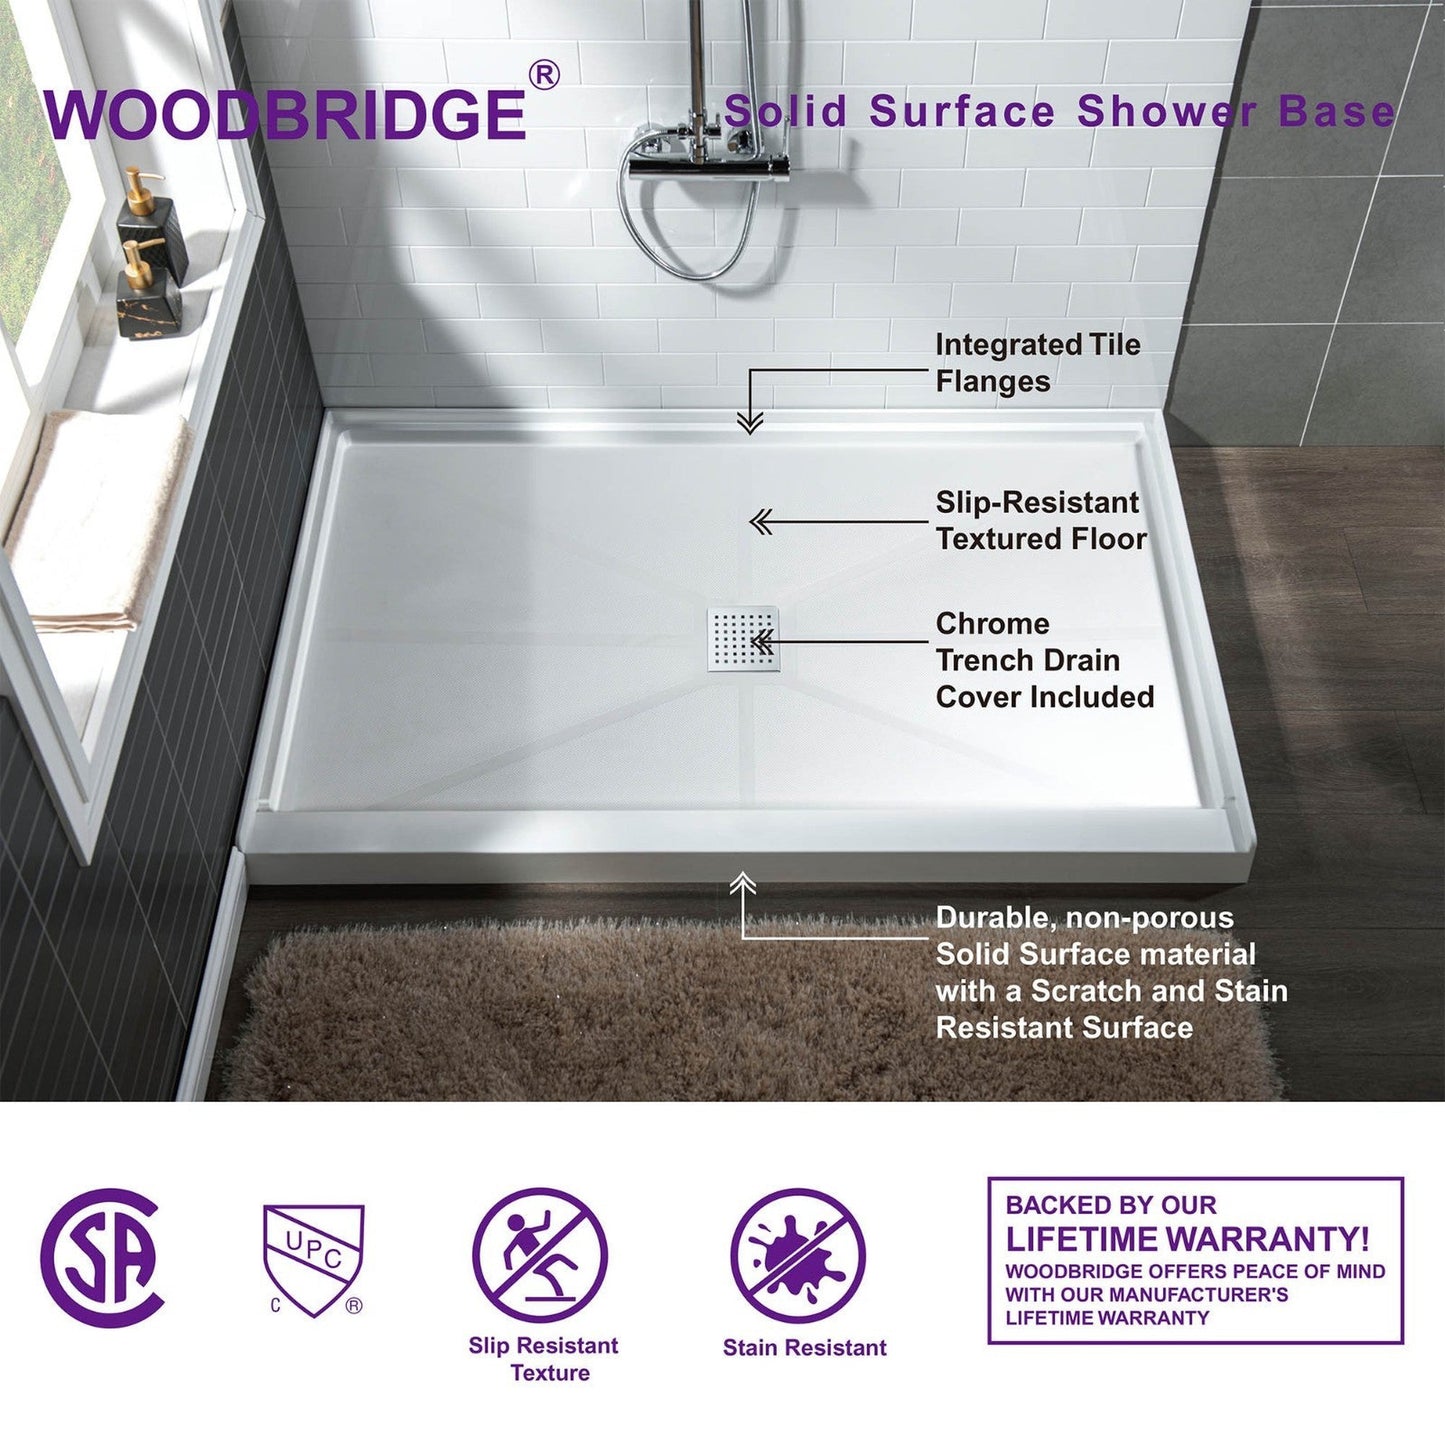 WoodBridge 48" x 32" White Solid Surface Shower Base Center Drain Location With Polished Chrome Trench Drain Cover